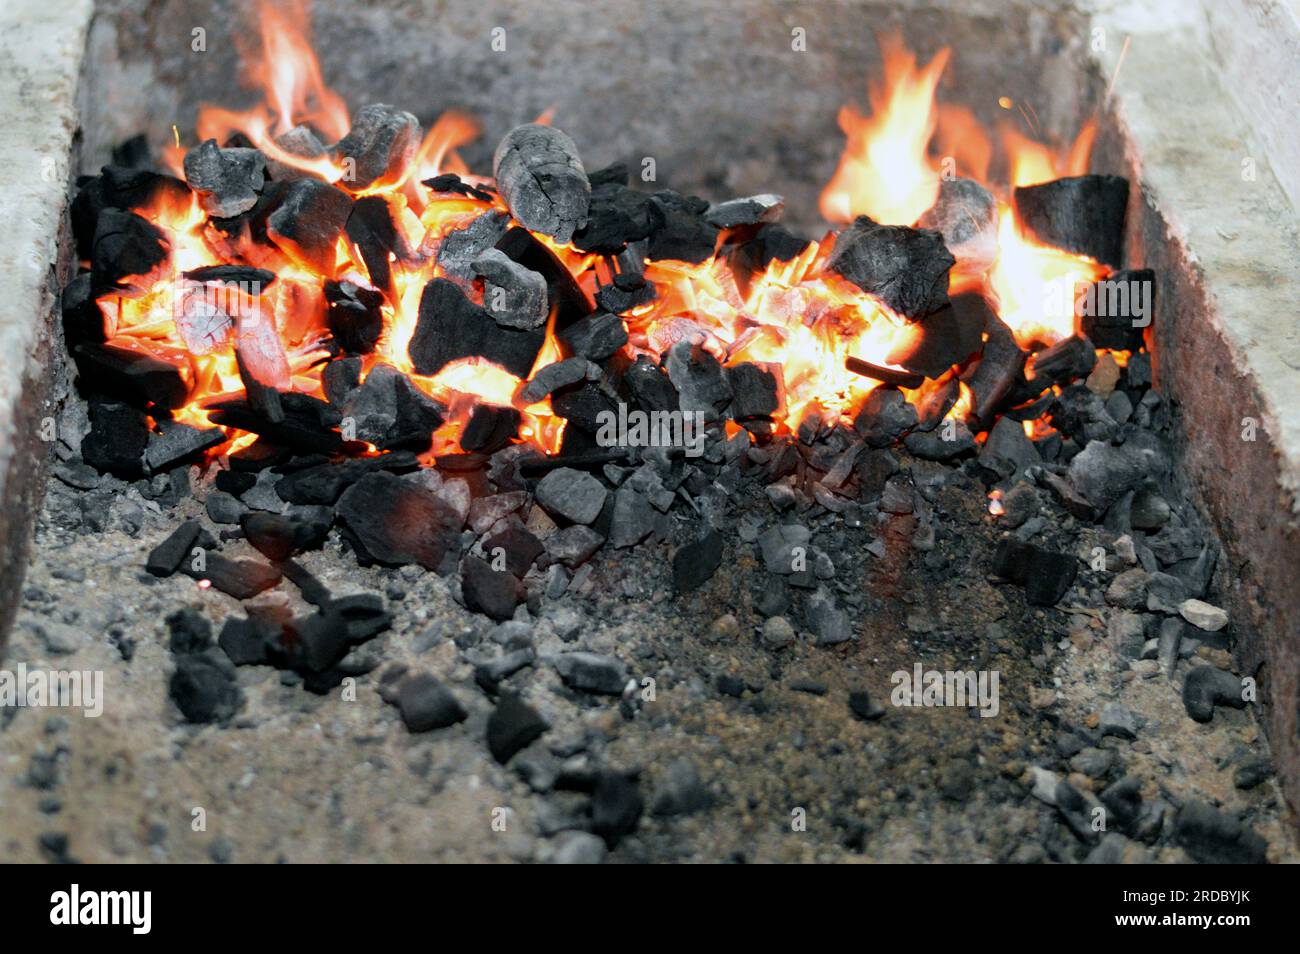 A charcoal fire in a Charcoal kettle grilling usually used for grilling meat and marinated beef meat on skewers like kebab and kofta kufta in middle e Stock Photo